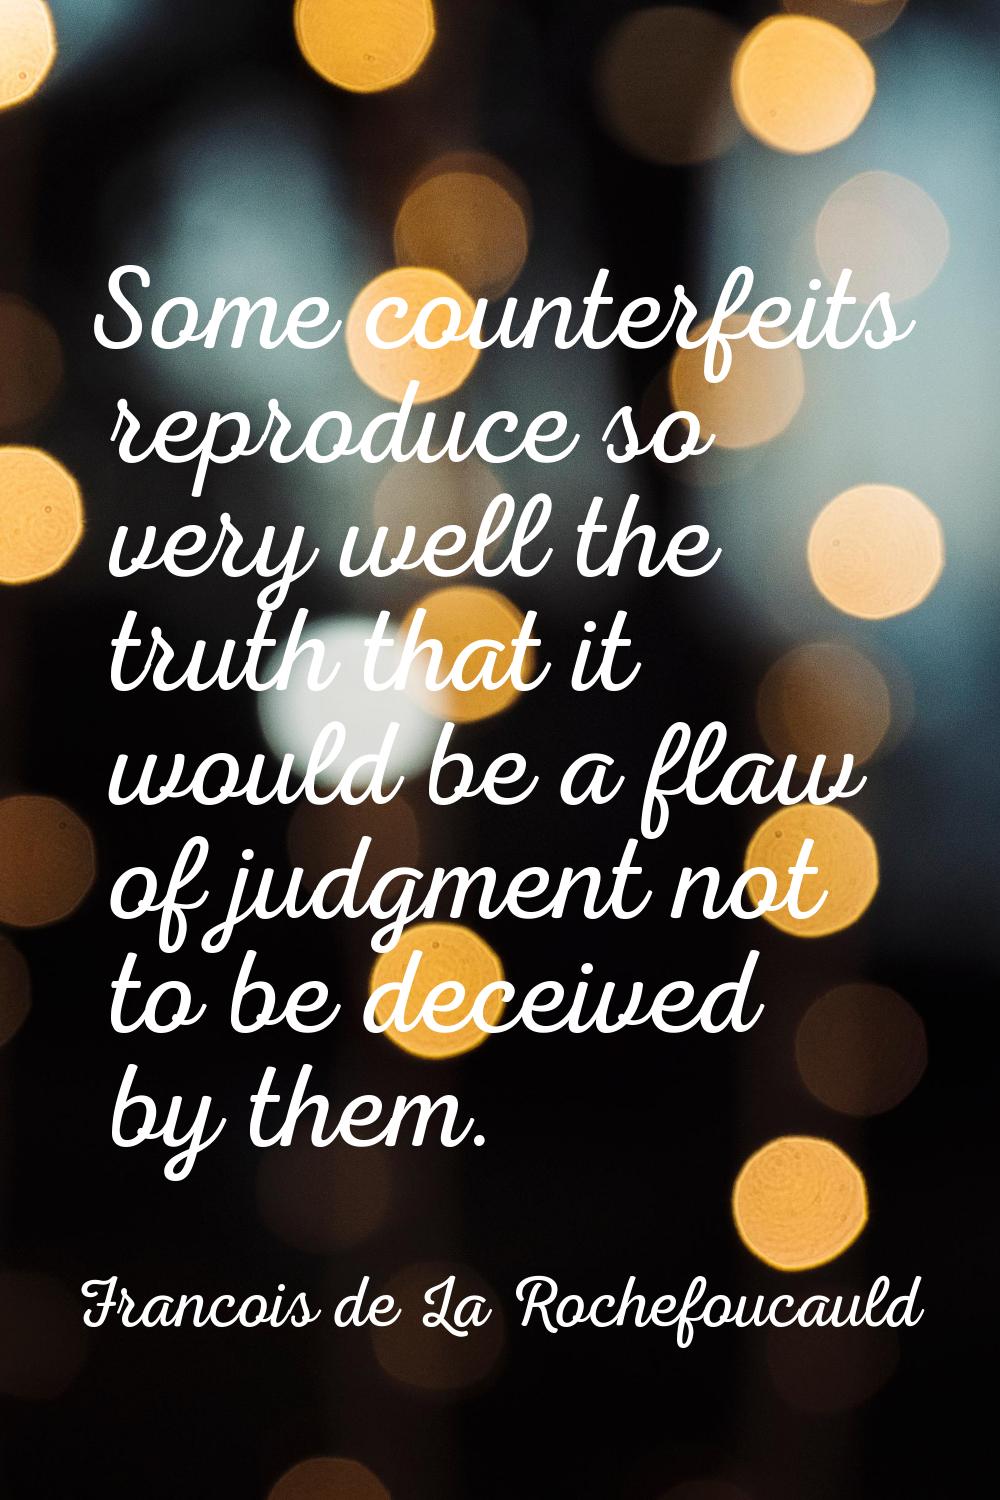 Some counterfeits reproduce so very well the truth that it would be a flaw of judgment not to be de